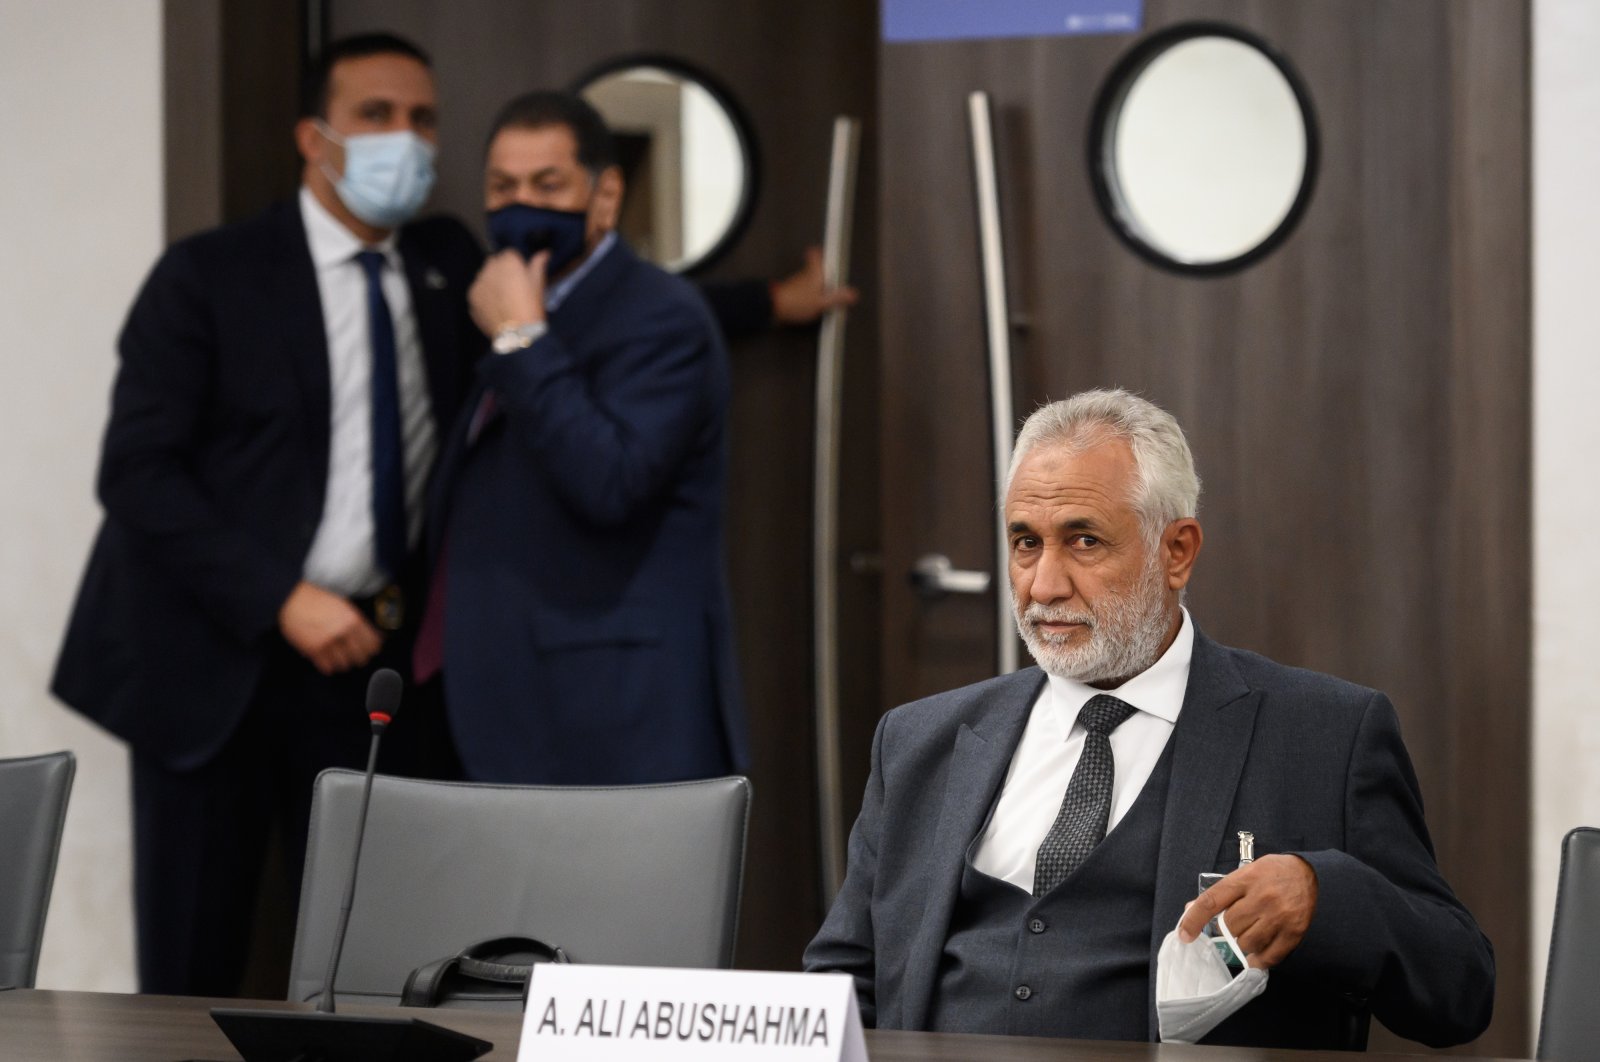 The head of the Government of National Accord (GNA) military delegation, Ahmed Ali Abushahma, attends talks between the rival factions in the Libya conflict, in Geneva, Switzerland, Oct. 20, 2020. (AP Photo)